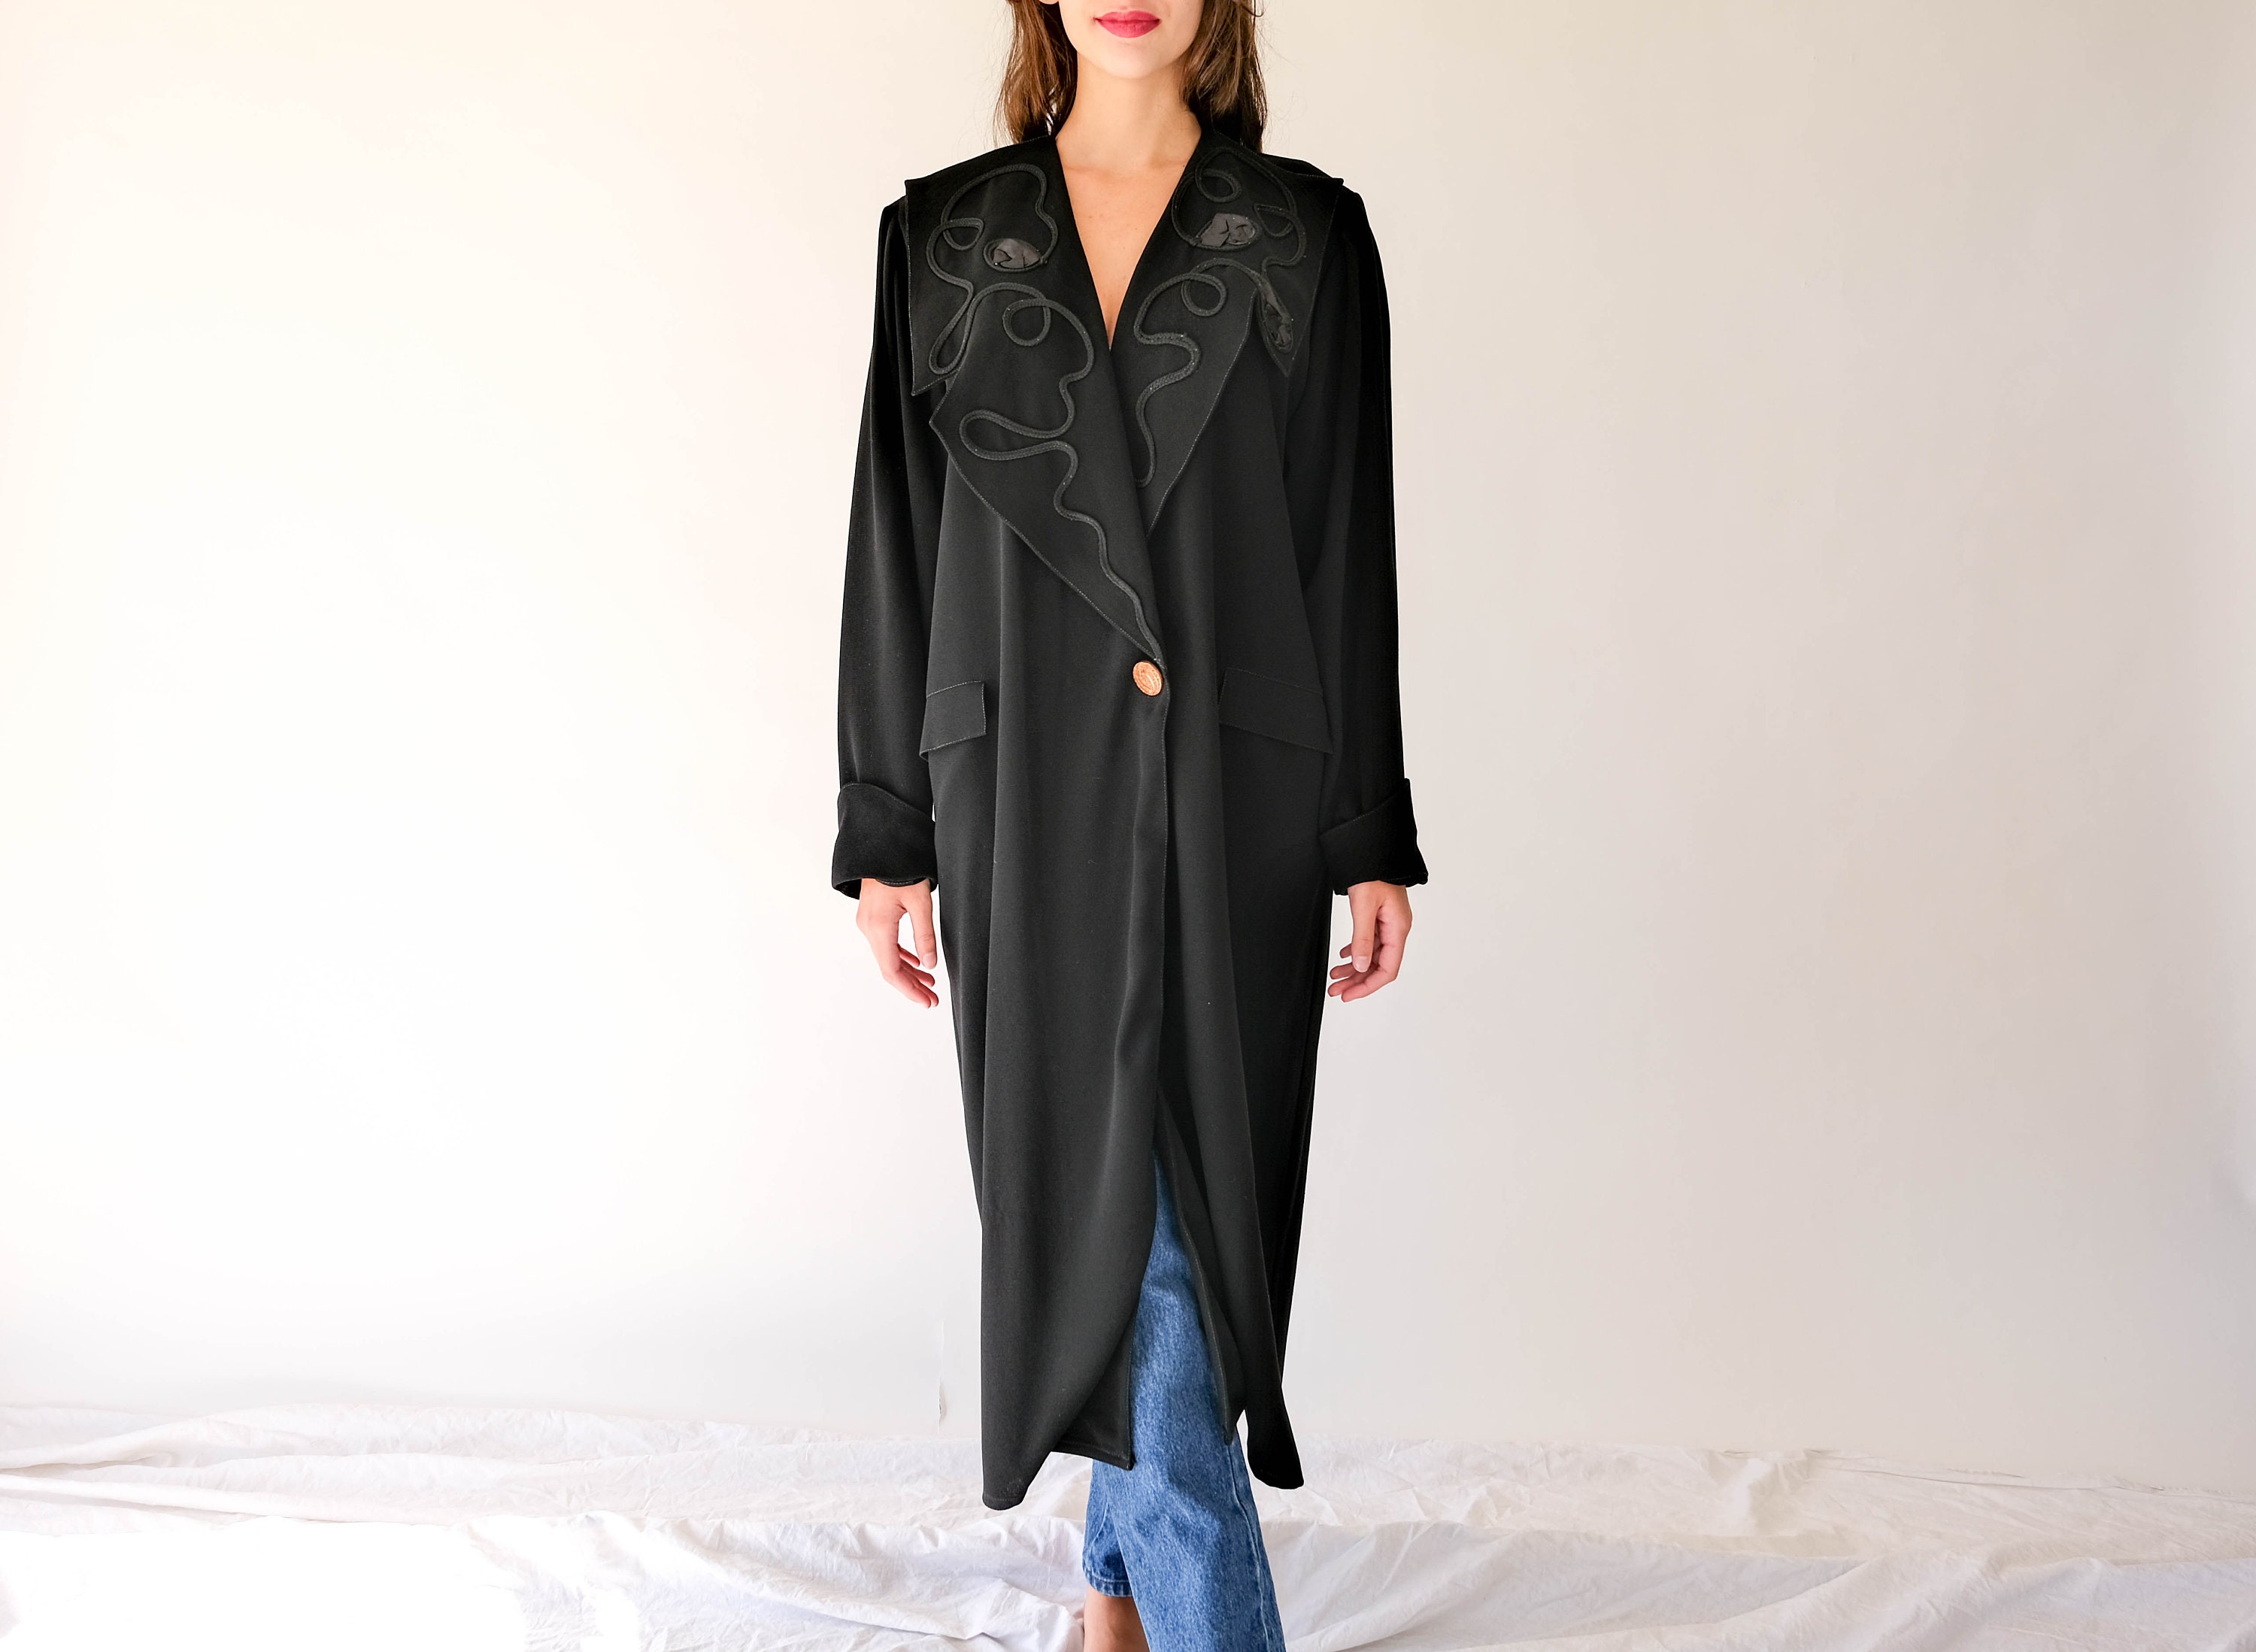 Vintage 80S Hobby Black Rayon Blend Crepe Duster with Large Braided Satin Floral Trim Lapels | Made in Italy 1980S Designer Boho Swing Coat